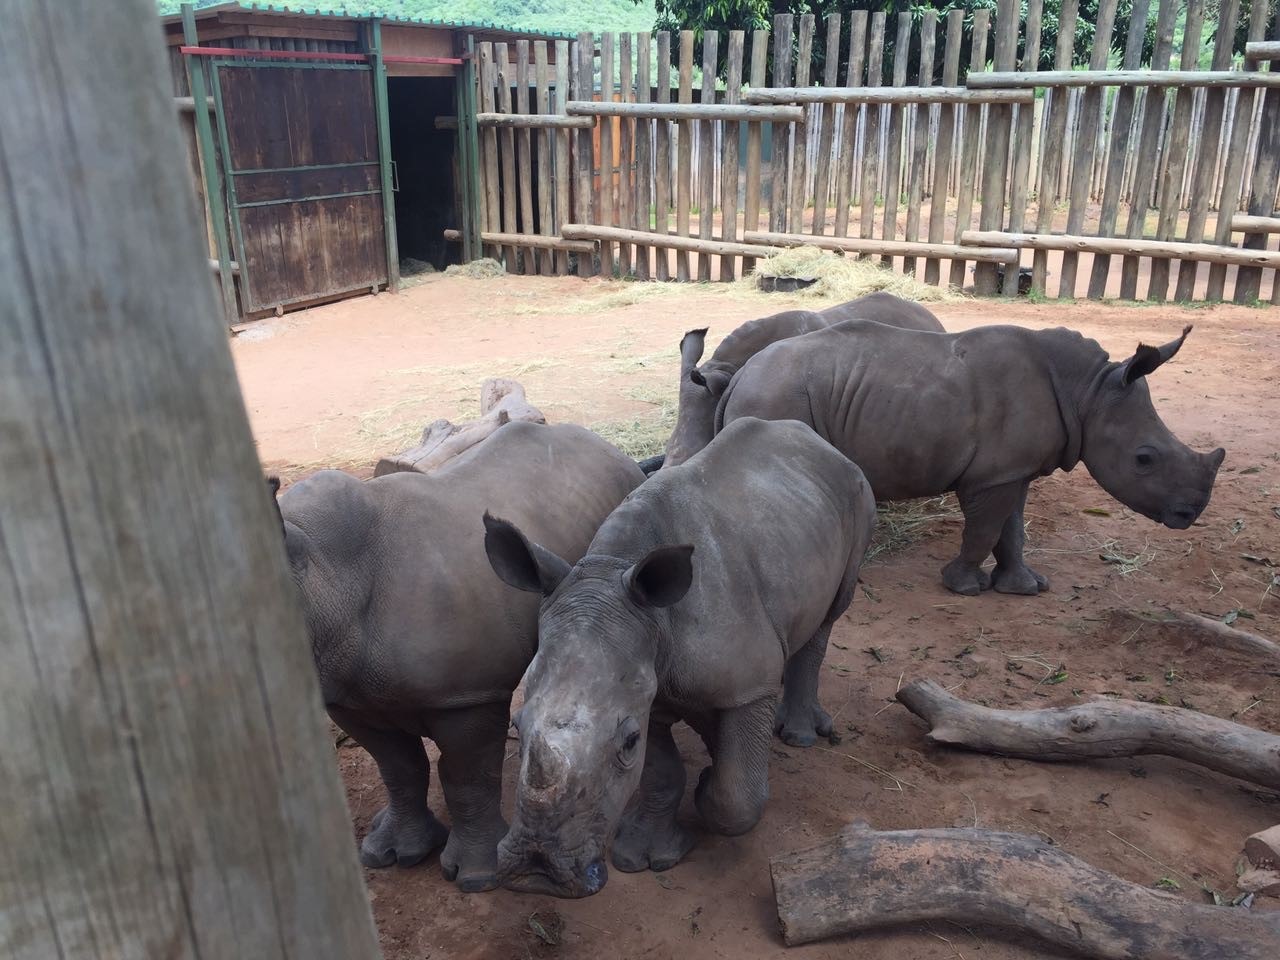 A small group of Rhinos in their enclosure